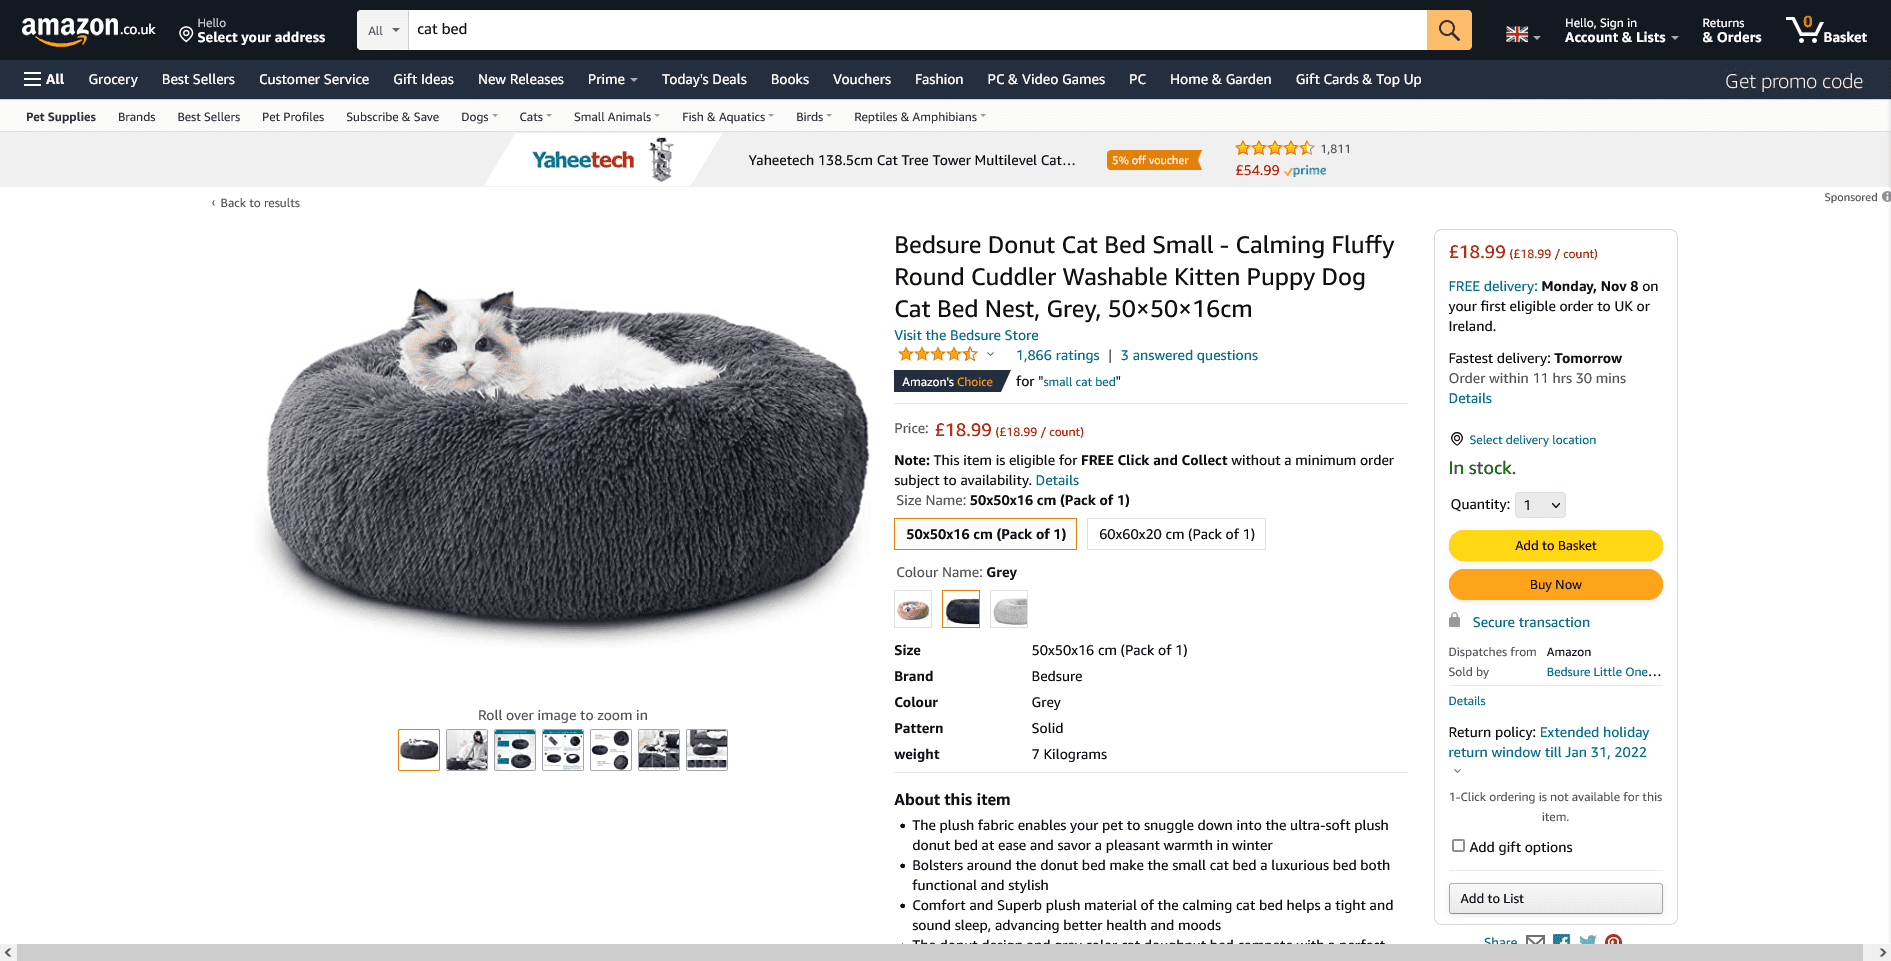 Screenshot of an Amazon Product Detail Page and the Buy Box